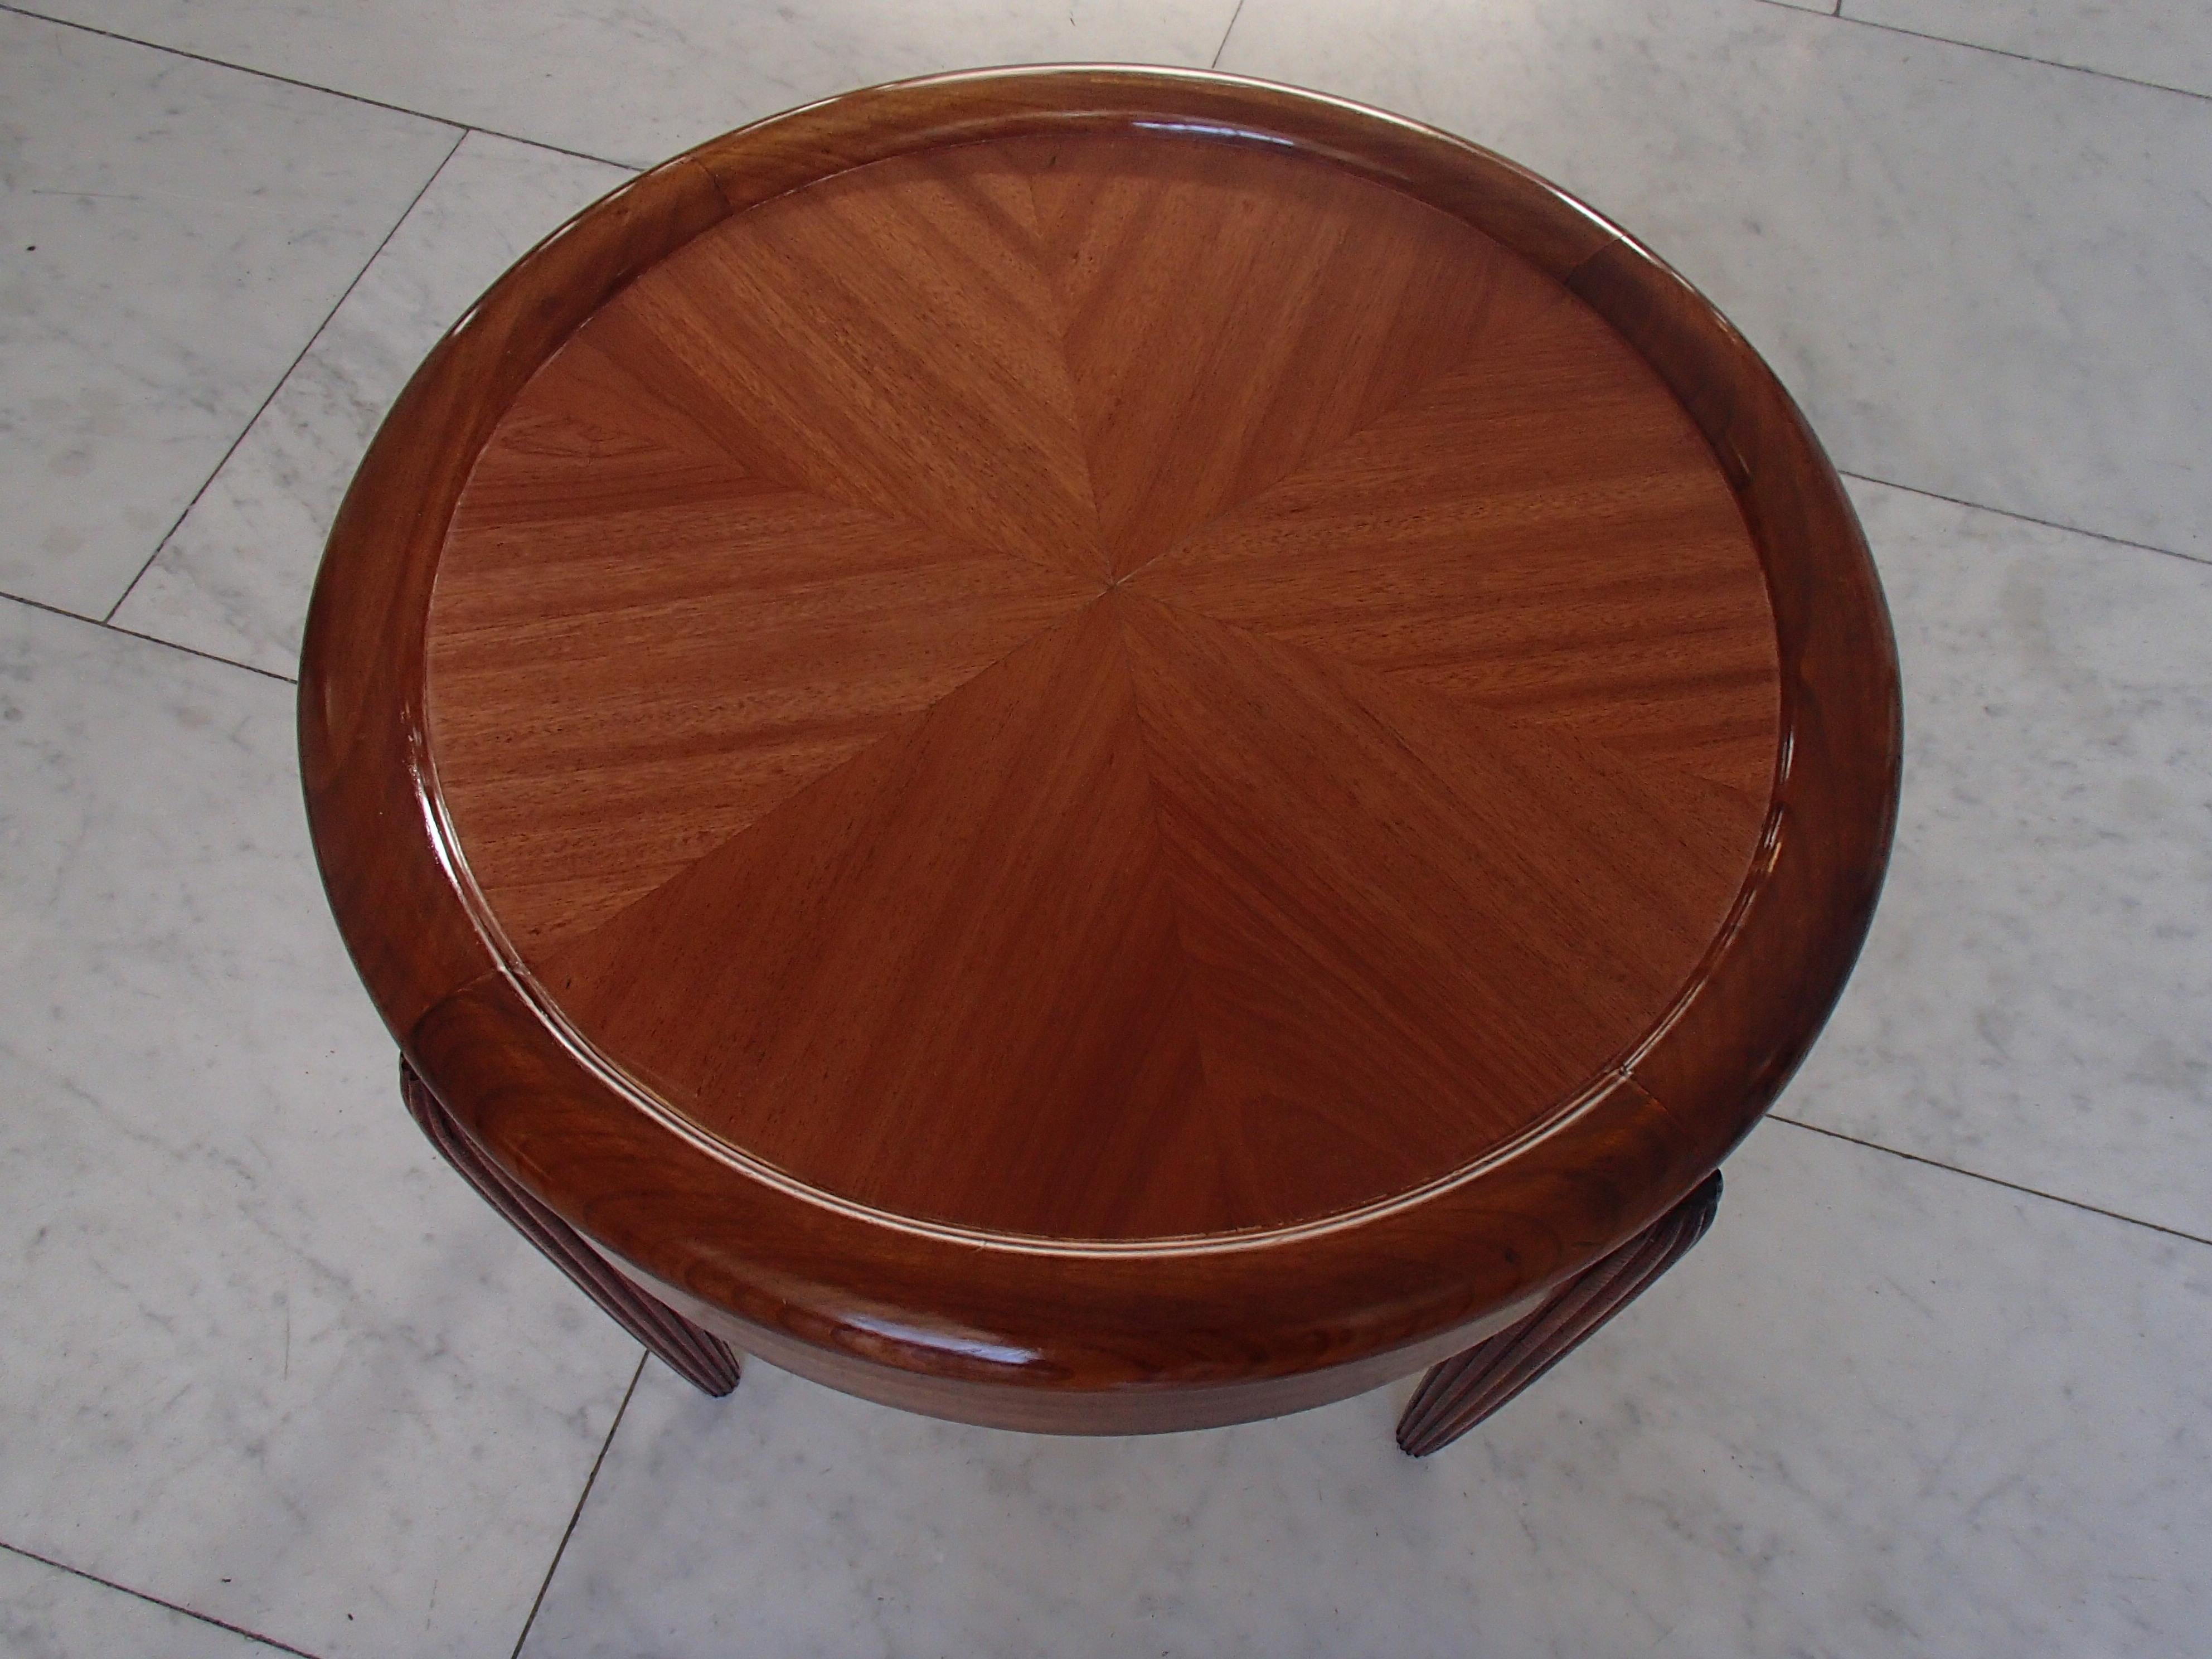 Art Deco small round full mahogany table with carfed legs.